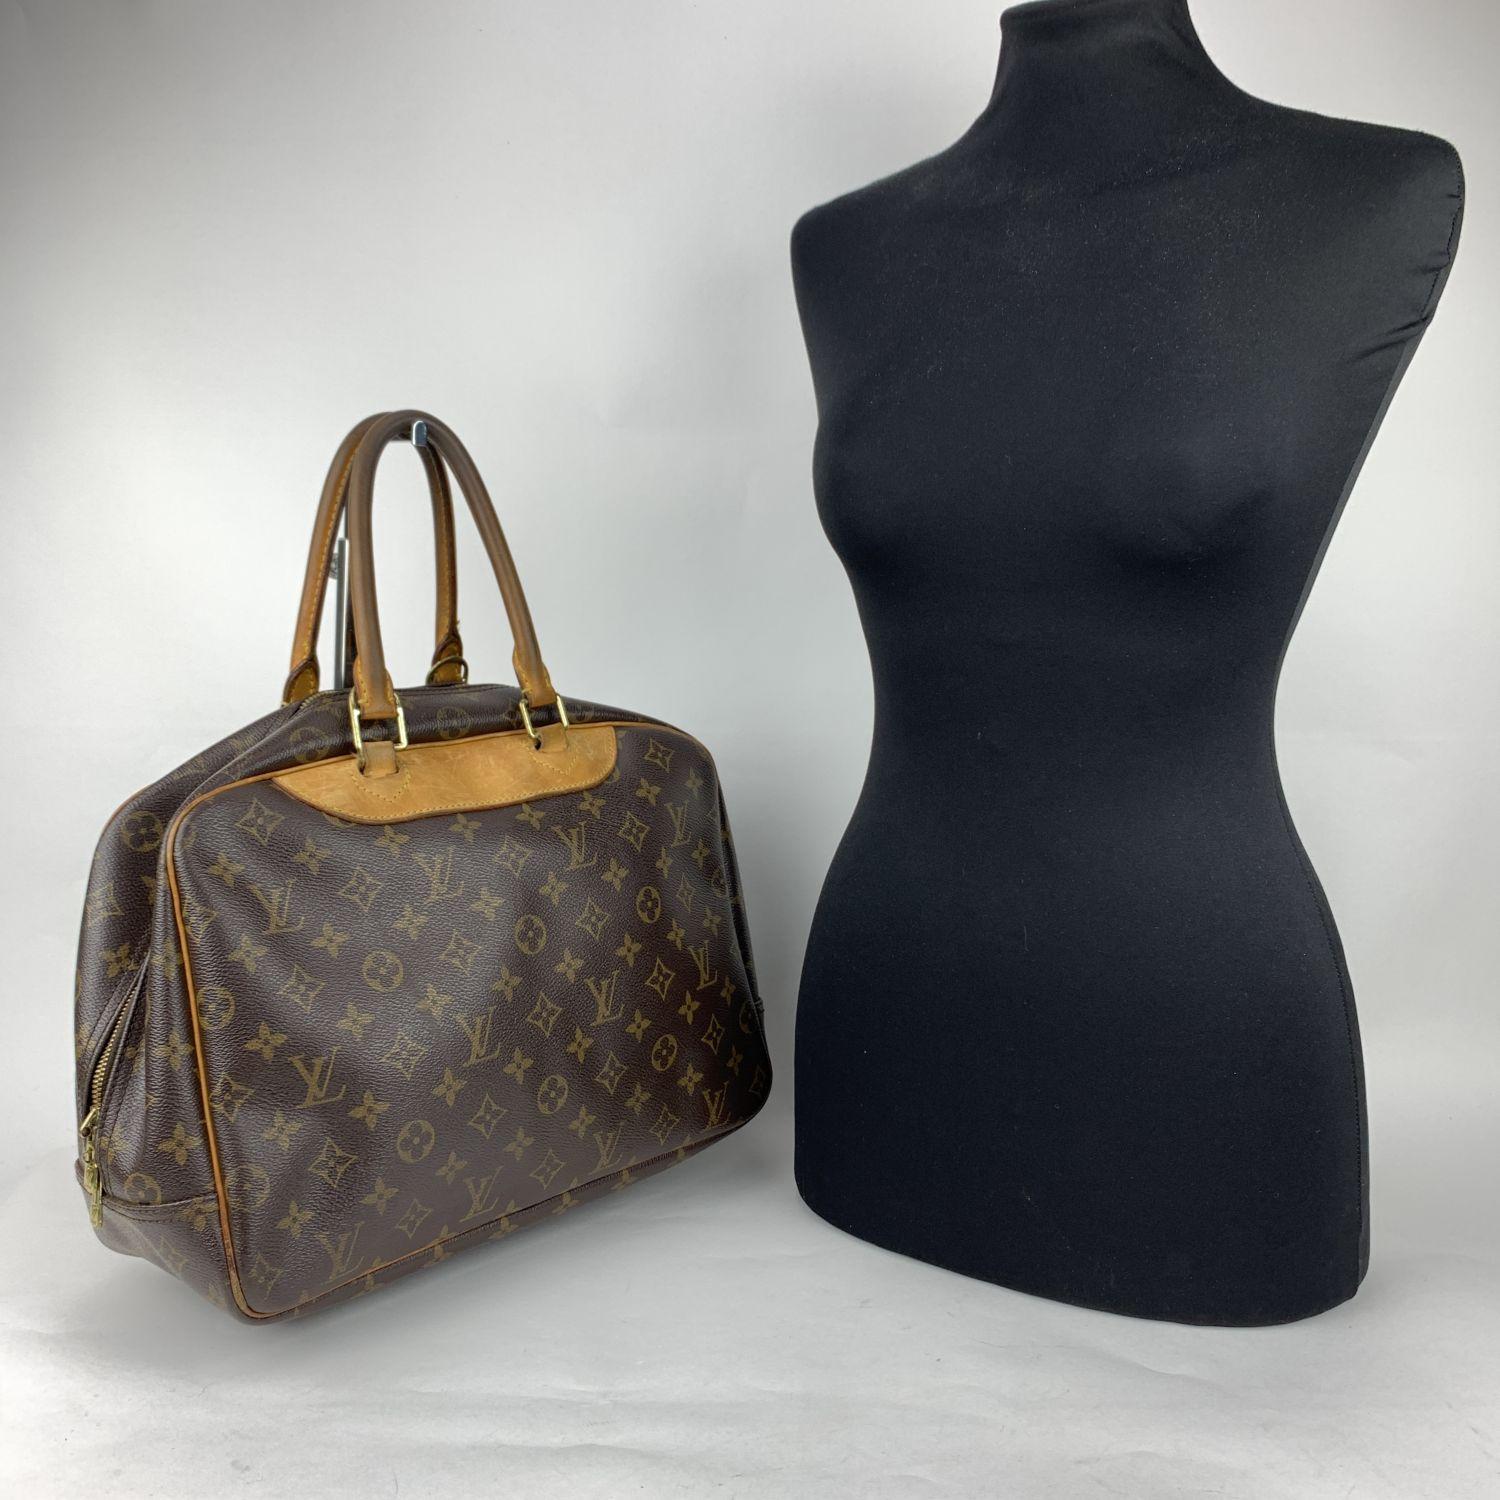 Louis Vuitton 'Deauville' satchel bag crafted in timeless monogram canvas with genuine leather trim and handles. Upper zipper closure. 1 exterior open pockets. Beige washable lining with 4 open pockets inside, 1 elastic strap to hold bottles and